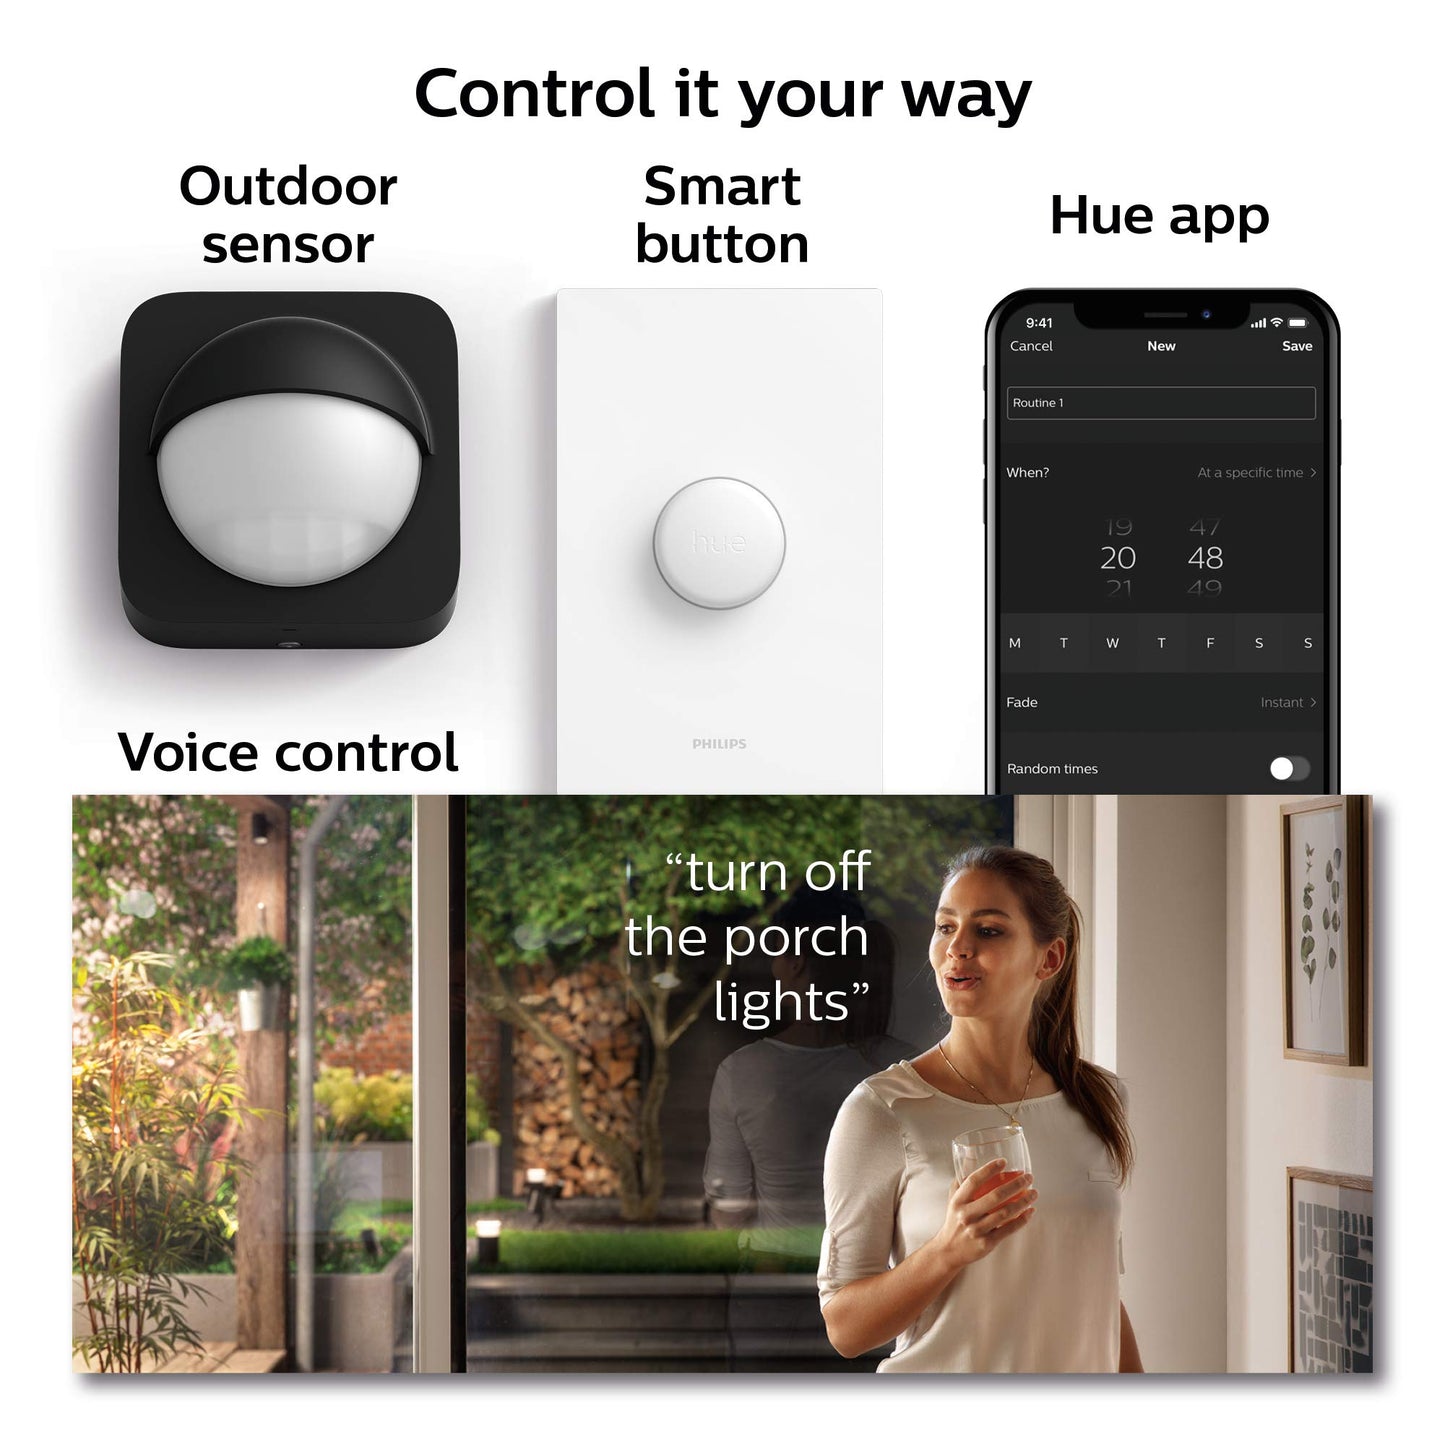 Philips Hue Econic Outdoor White & Color Wall & Ceiling Light Fixture (Hue Hub Required, Works with Alexa, Apple Homekit & Google Assistant)